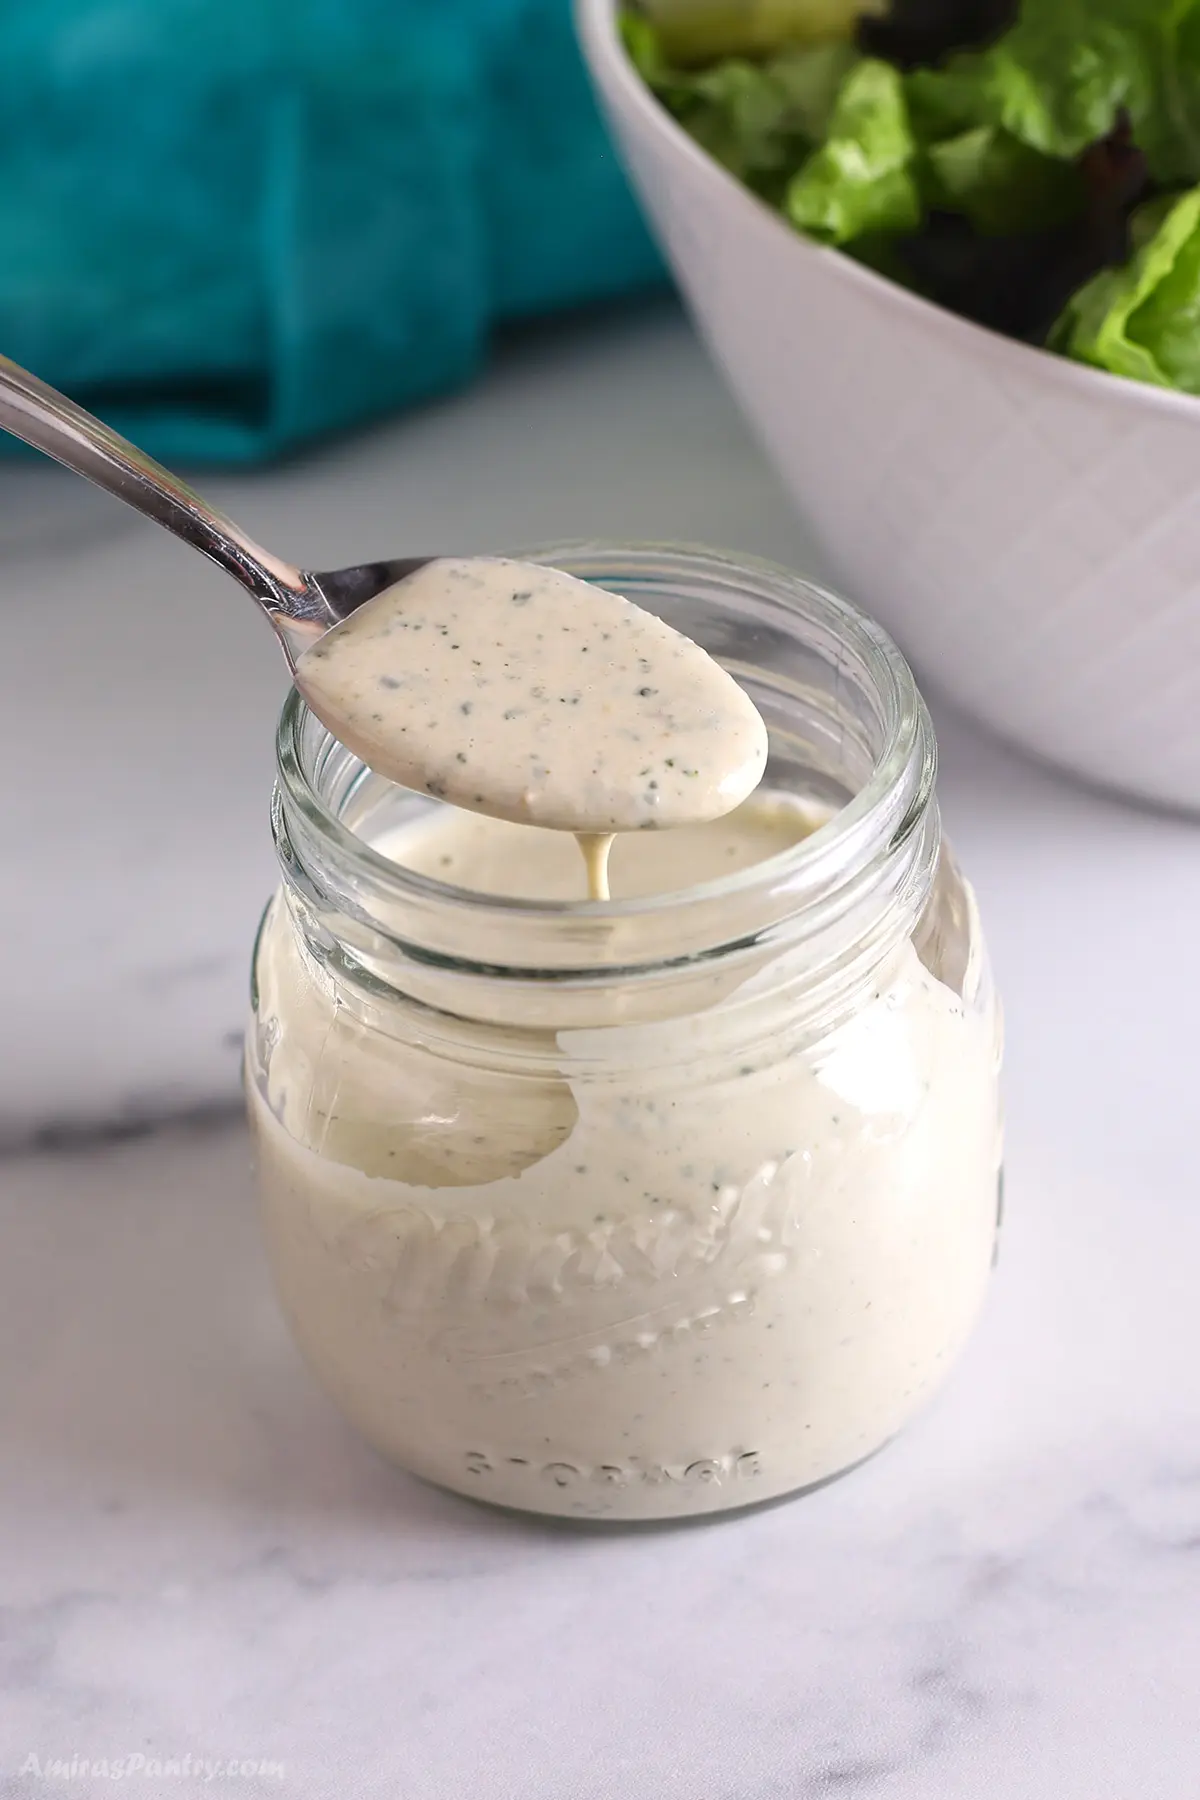 A spoon scooping some lemon herb tahini out of a jar.